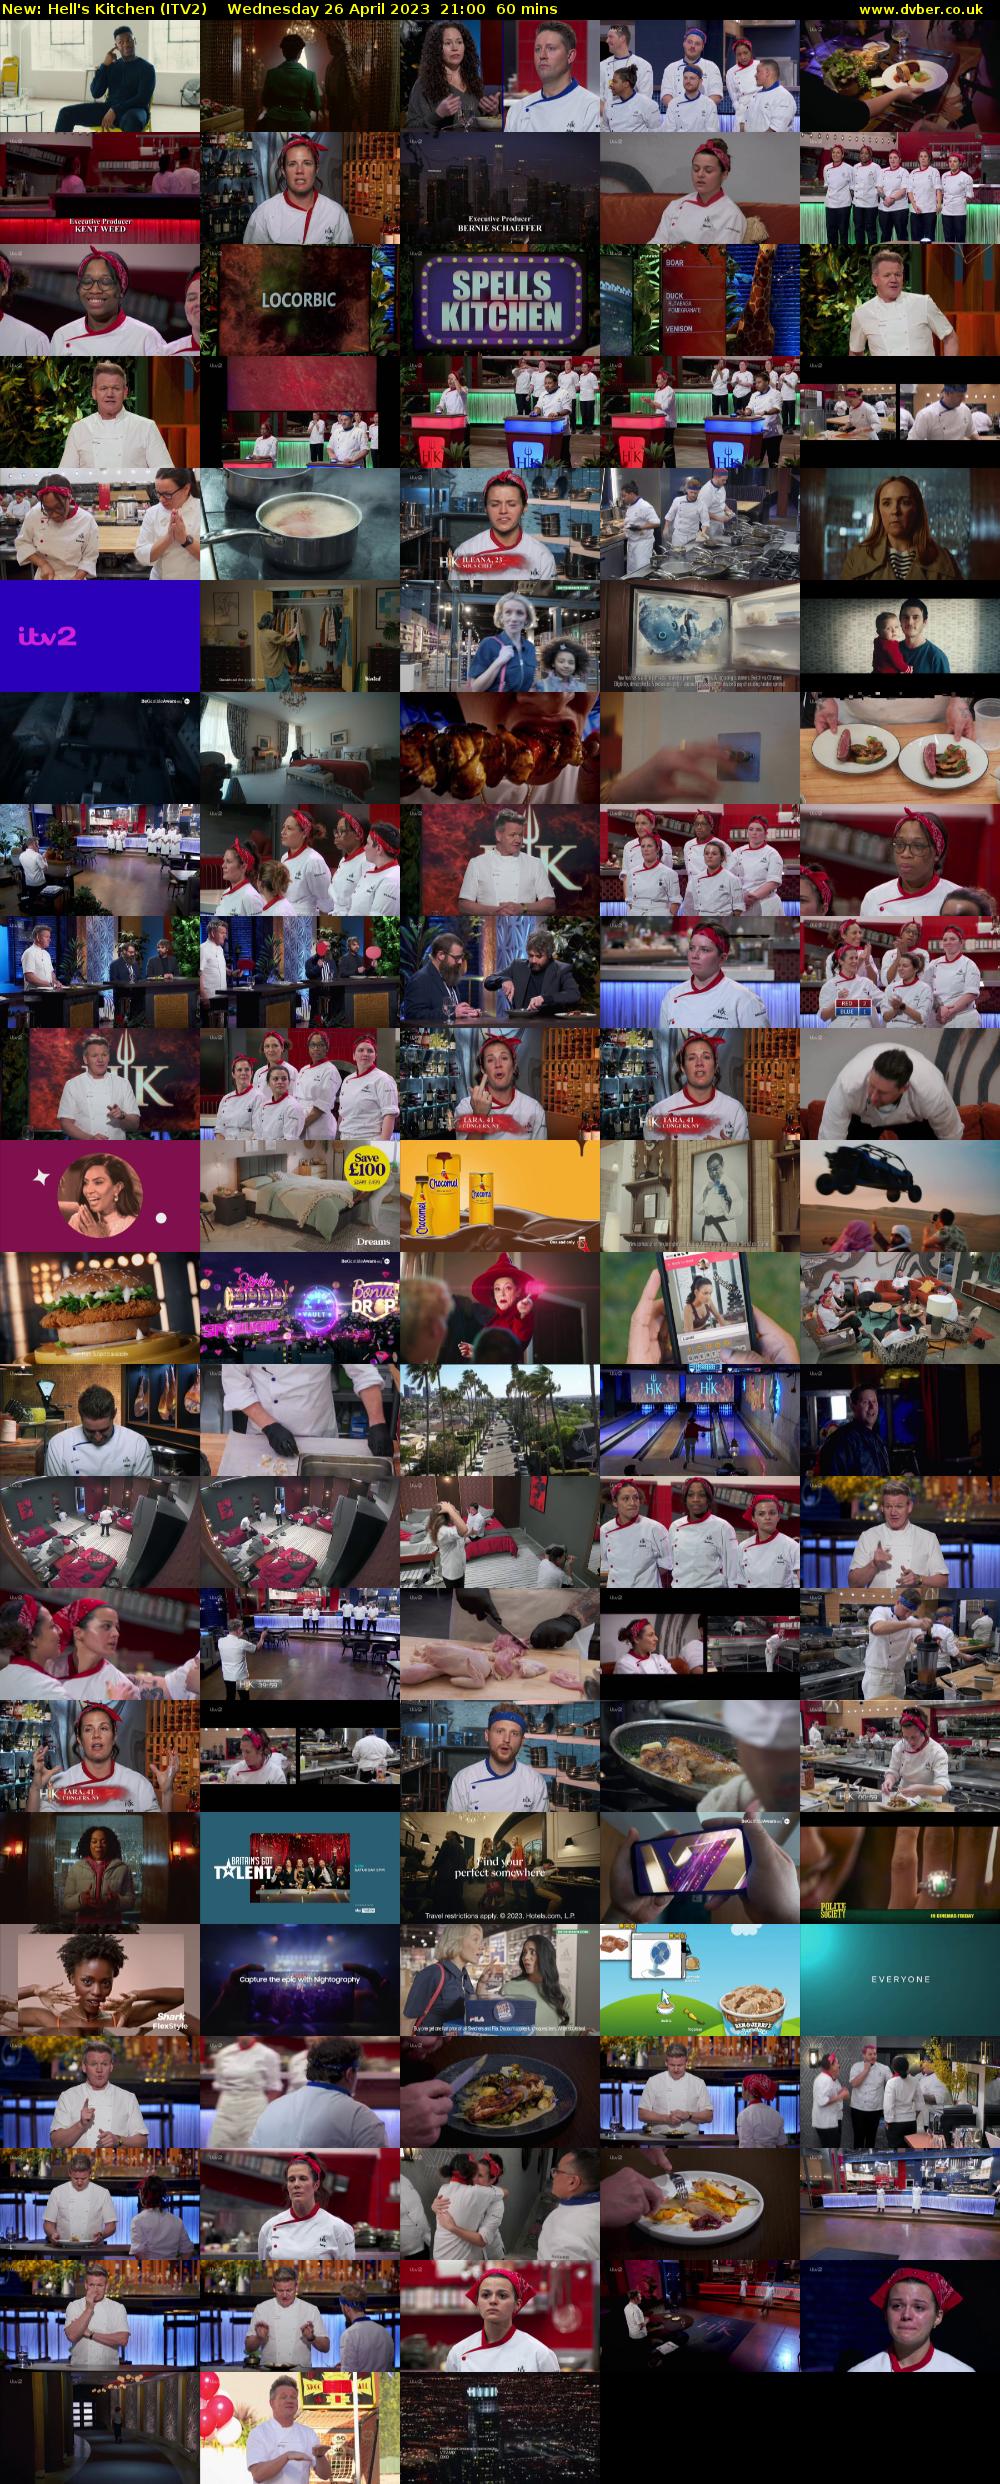 Hell's Kitchen (ITV2) Wednesday 26 April 2023 21:00 - 22:00